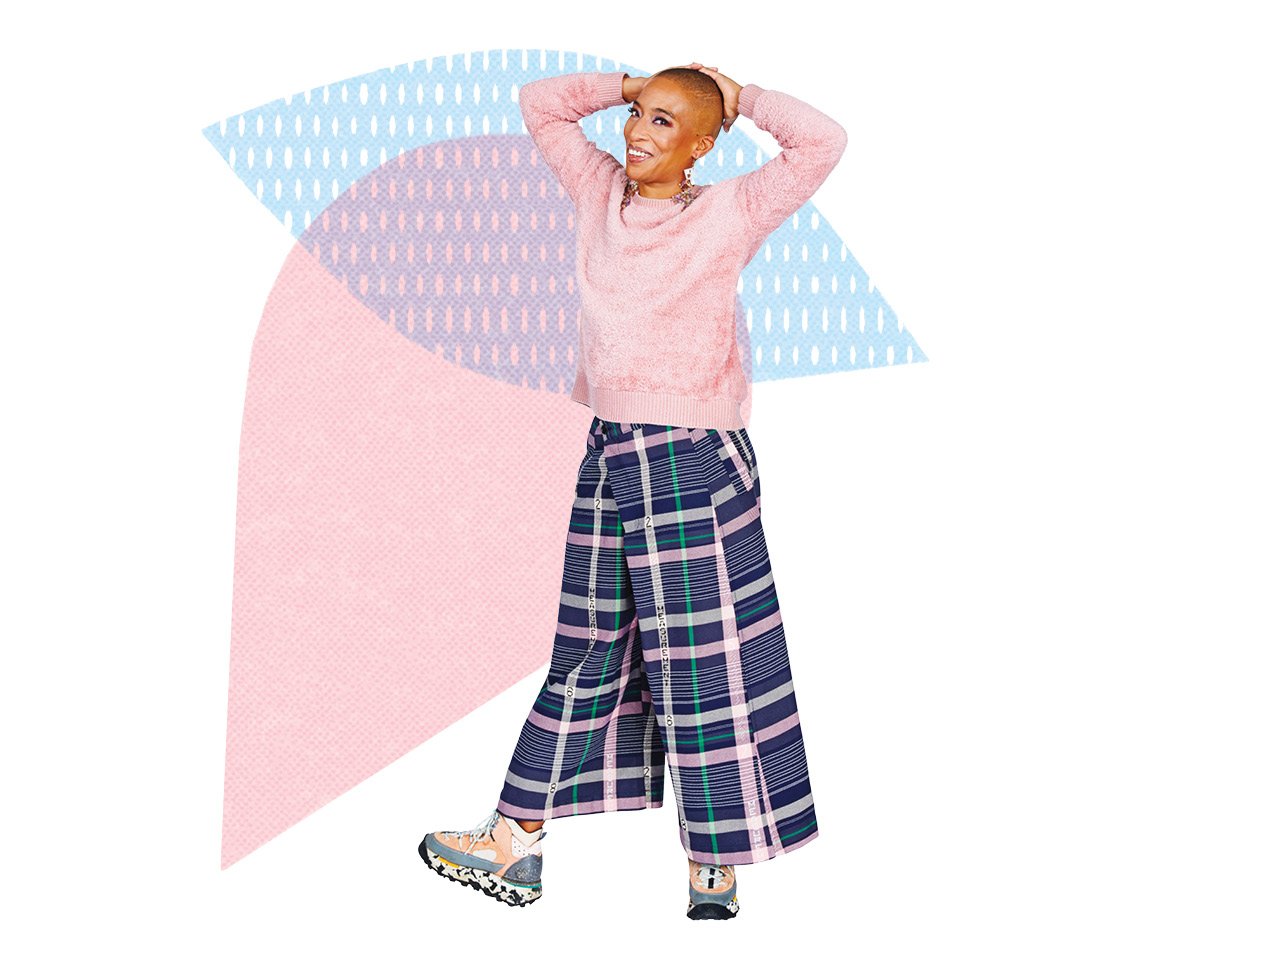 Sweater: Topshop. A woman putting her hands on her head, wearing a pink sweater and plaid pants.